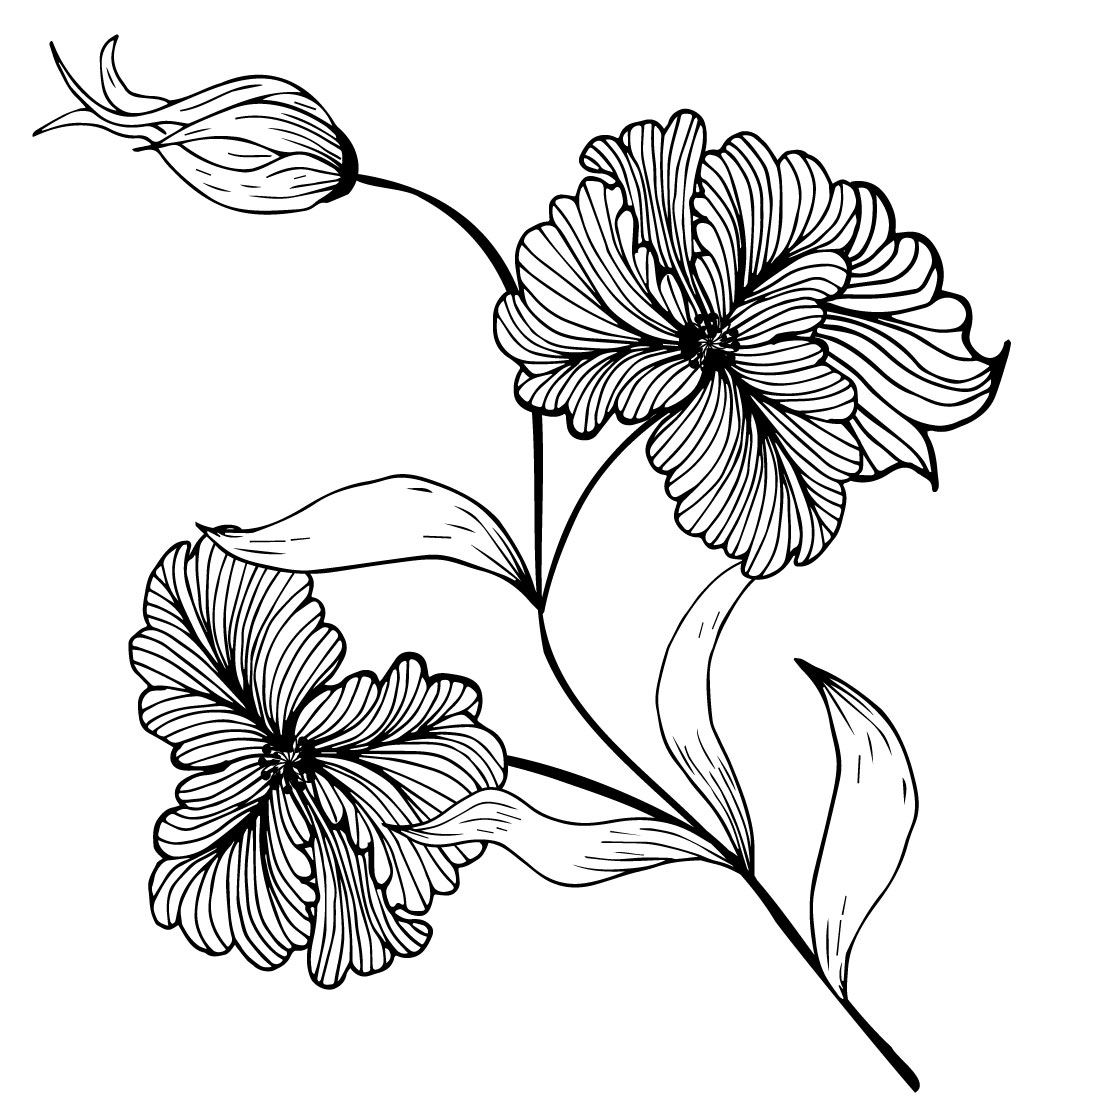 Delicate hand drawn flowers.